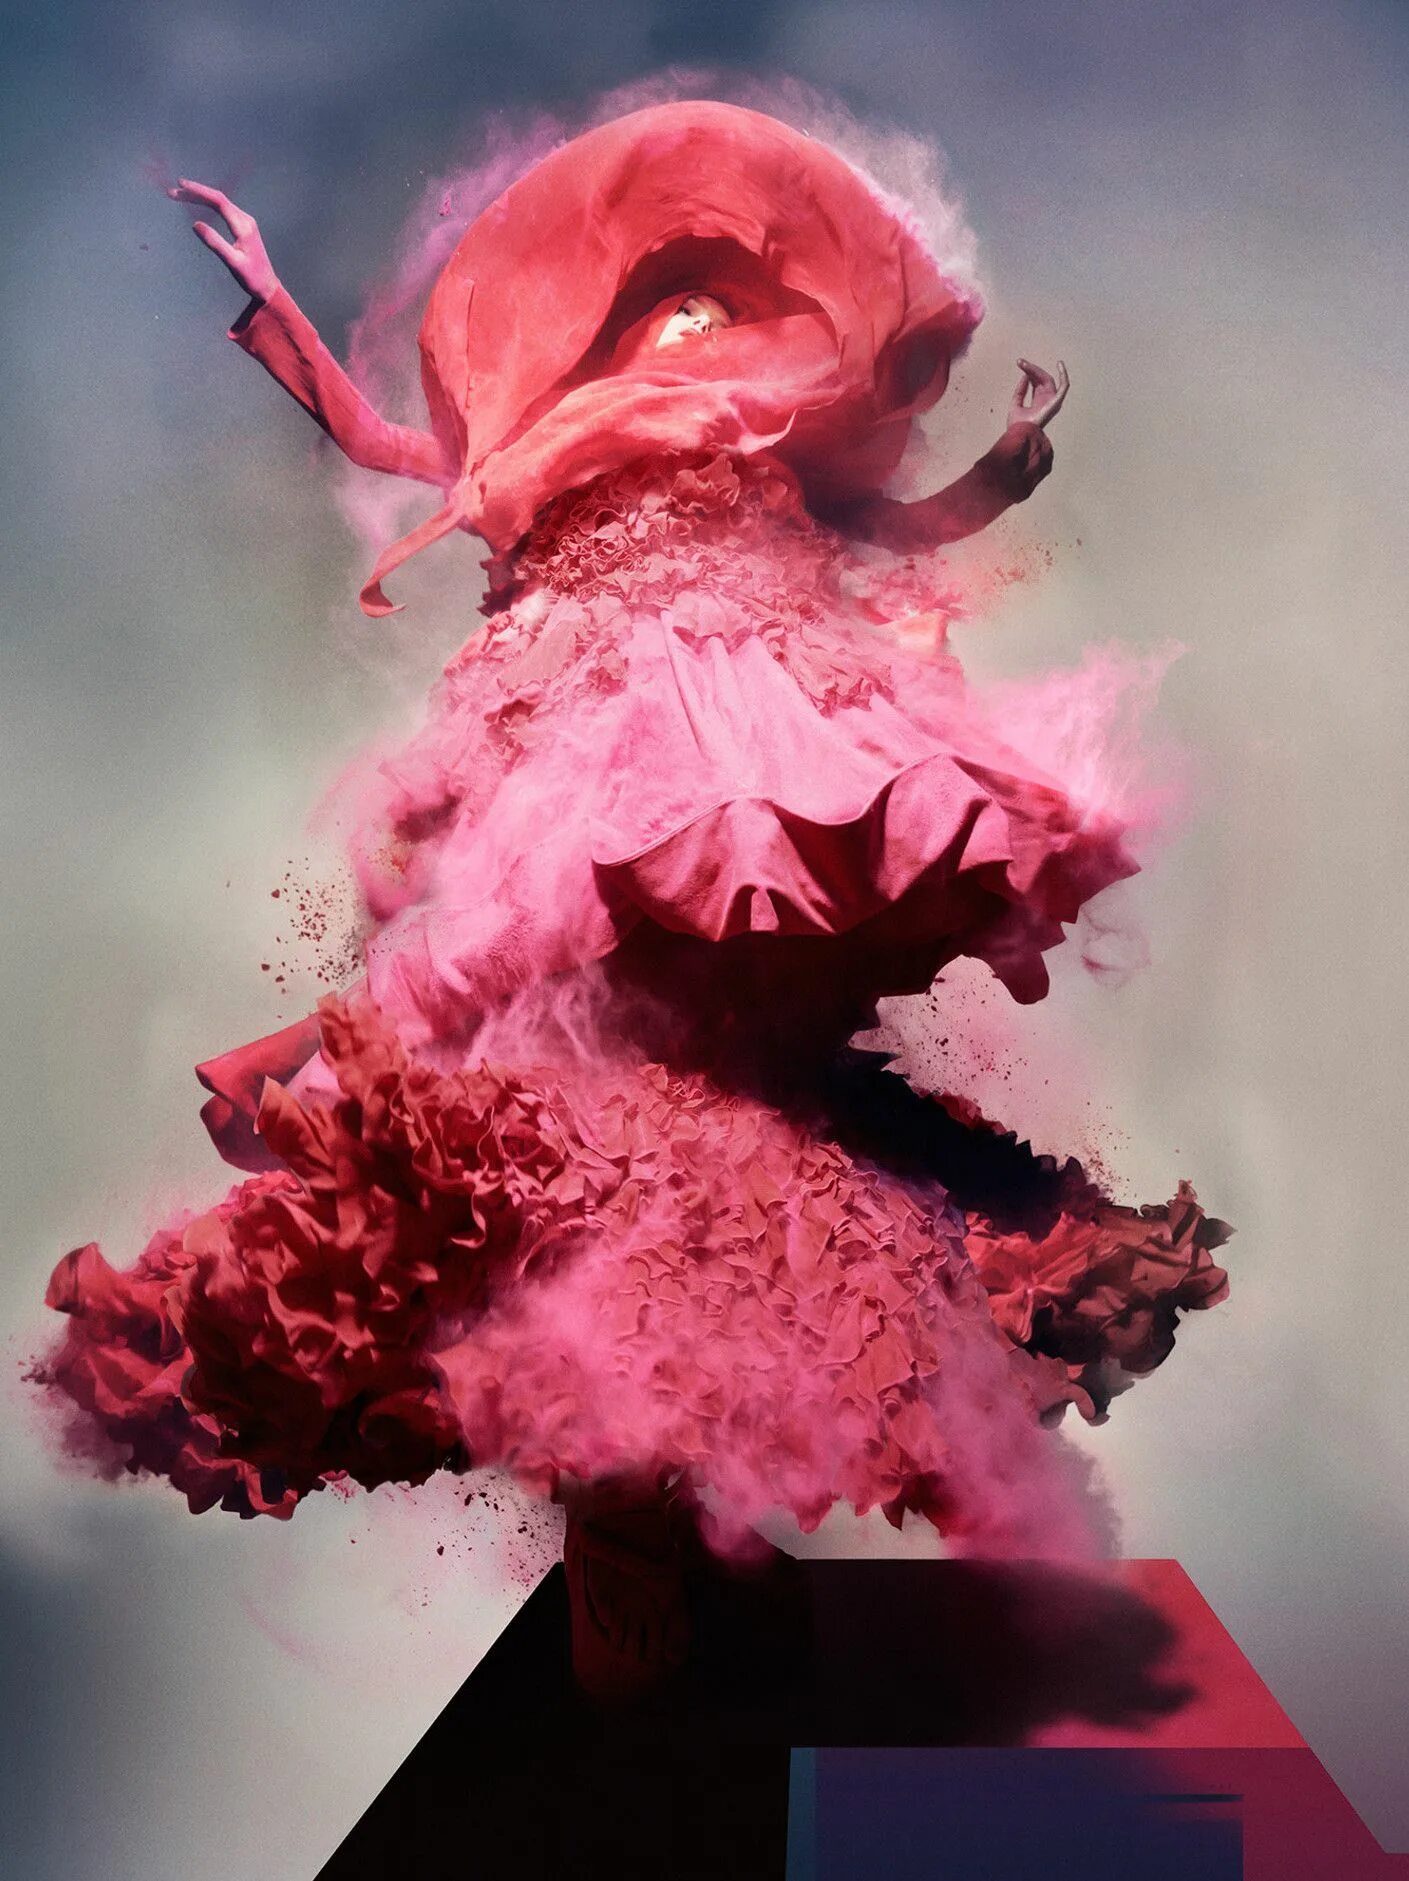 Nick night. Nick Knight. Nick Knight фотограф. Pink: the History of a Punk, pretty, powerful Color. Ник Найт фотограф работы.